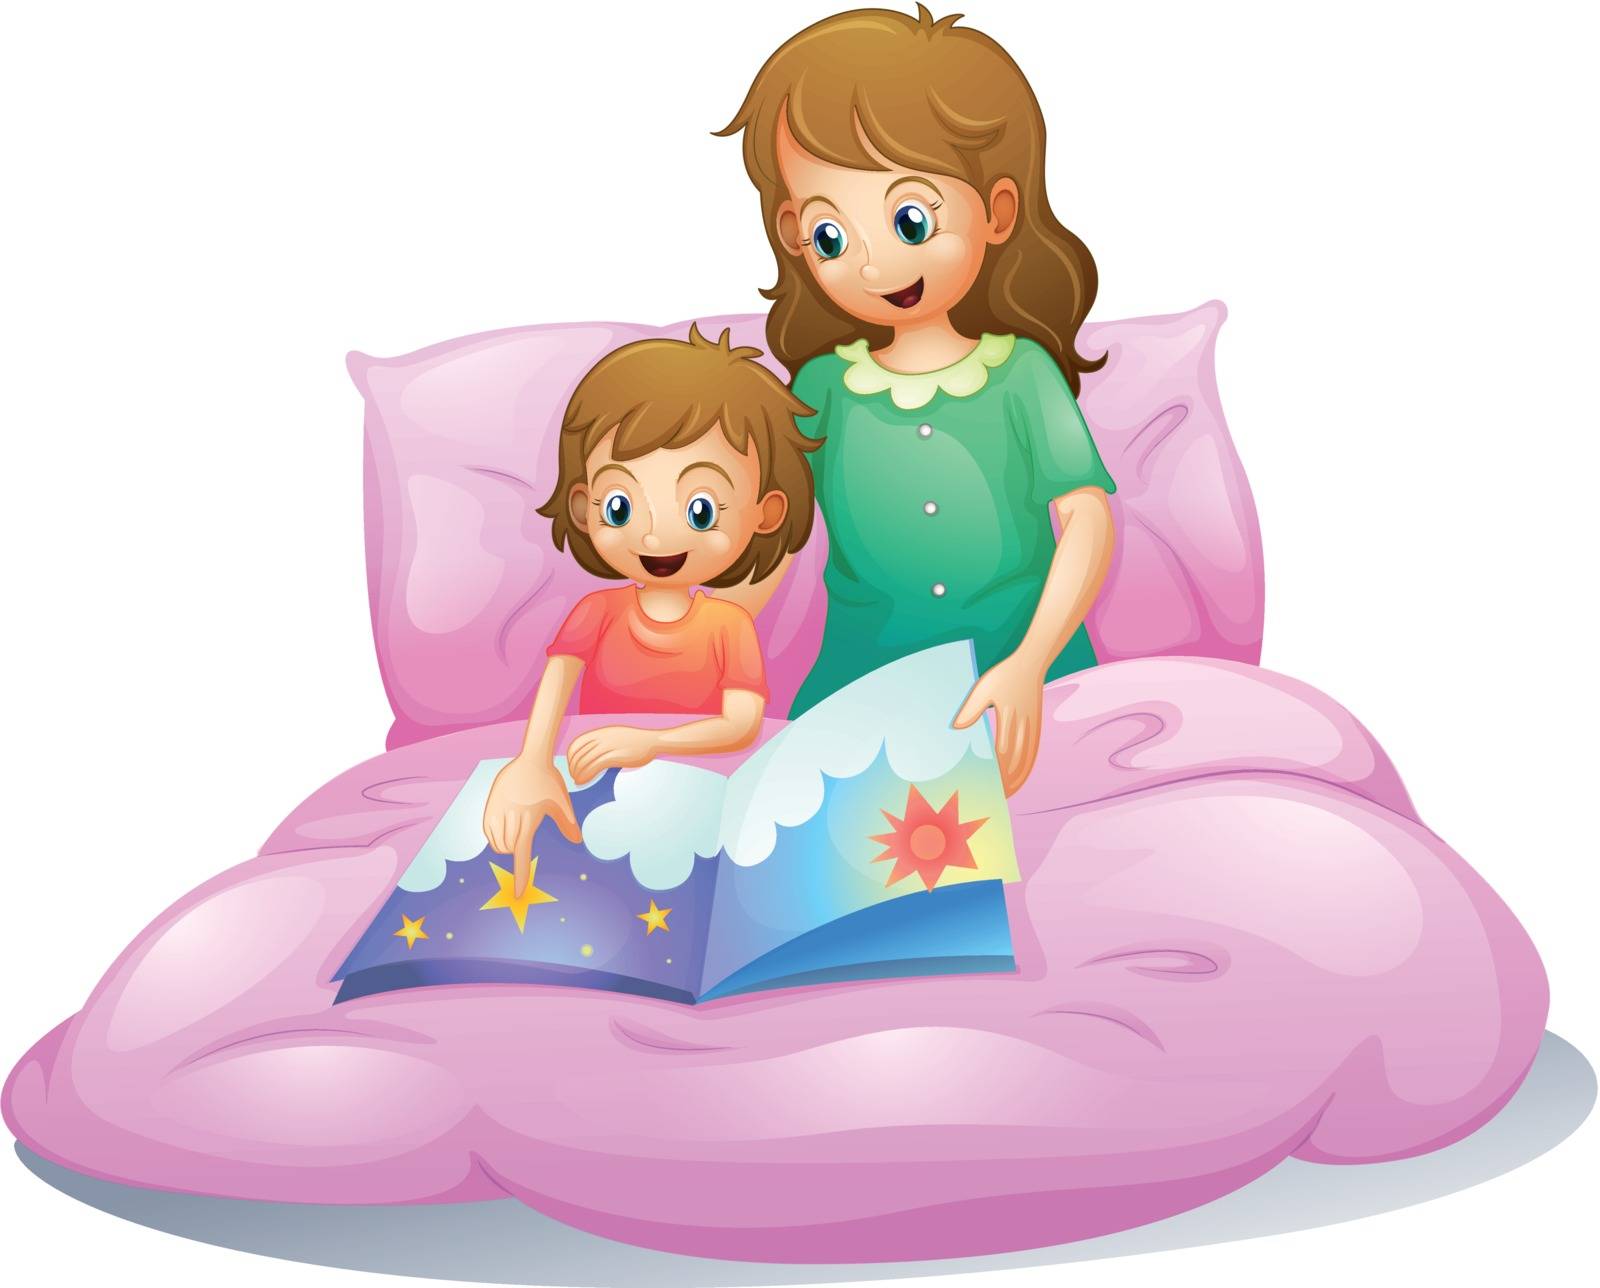 illustration of mom and kid sitting on a bed